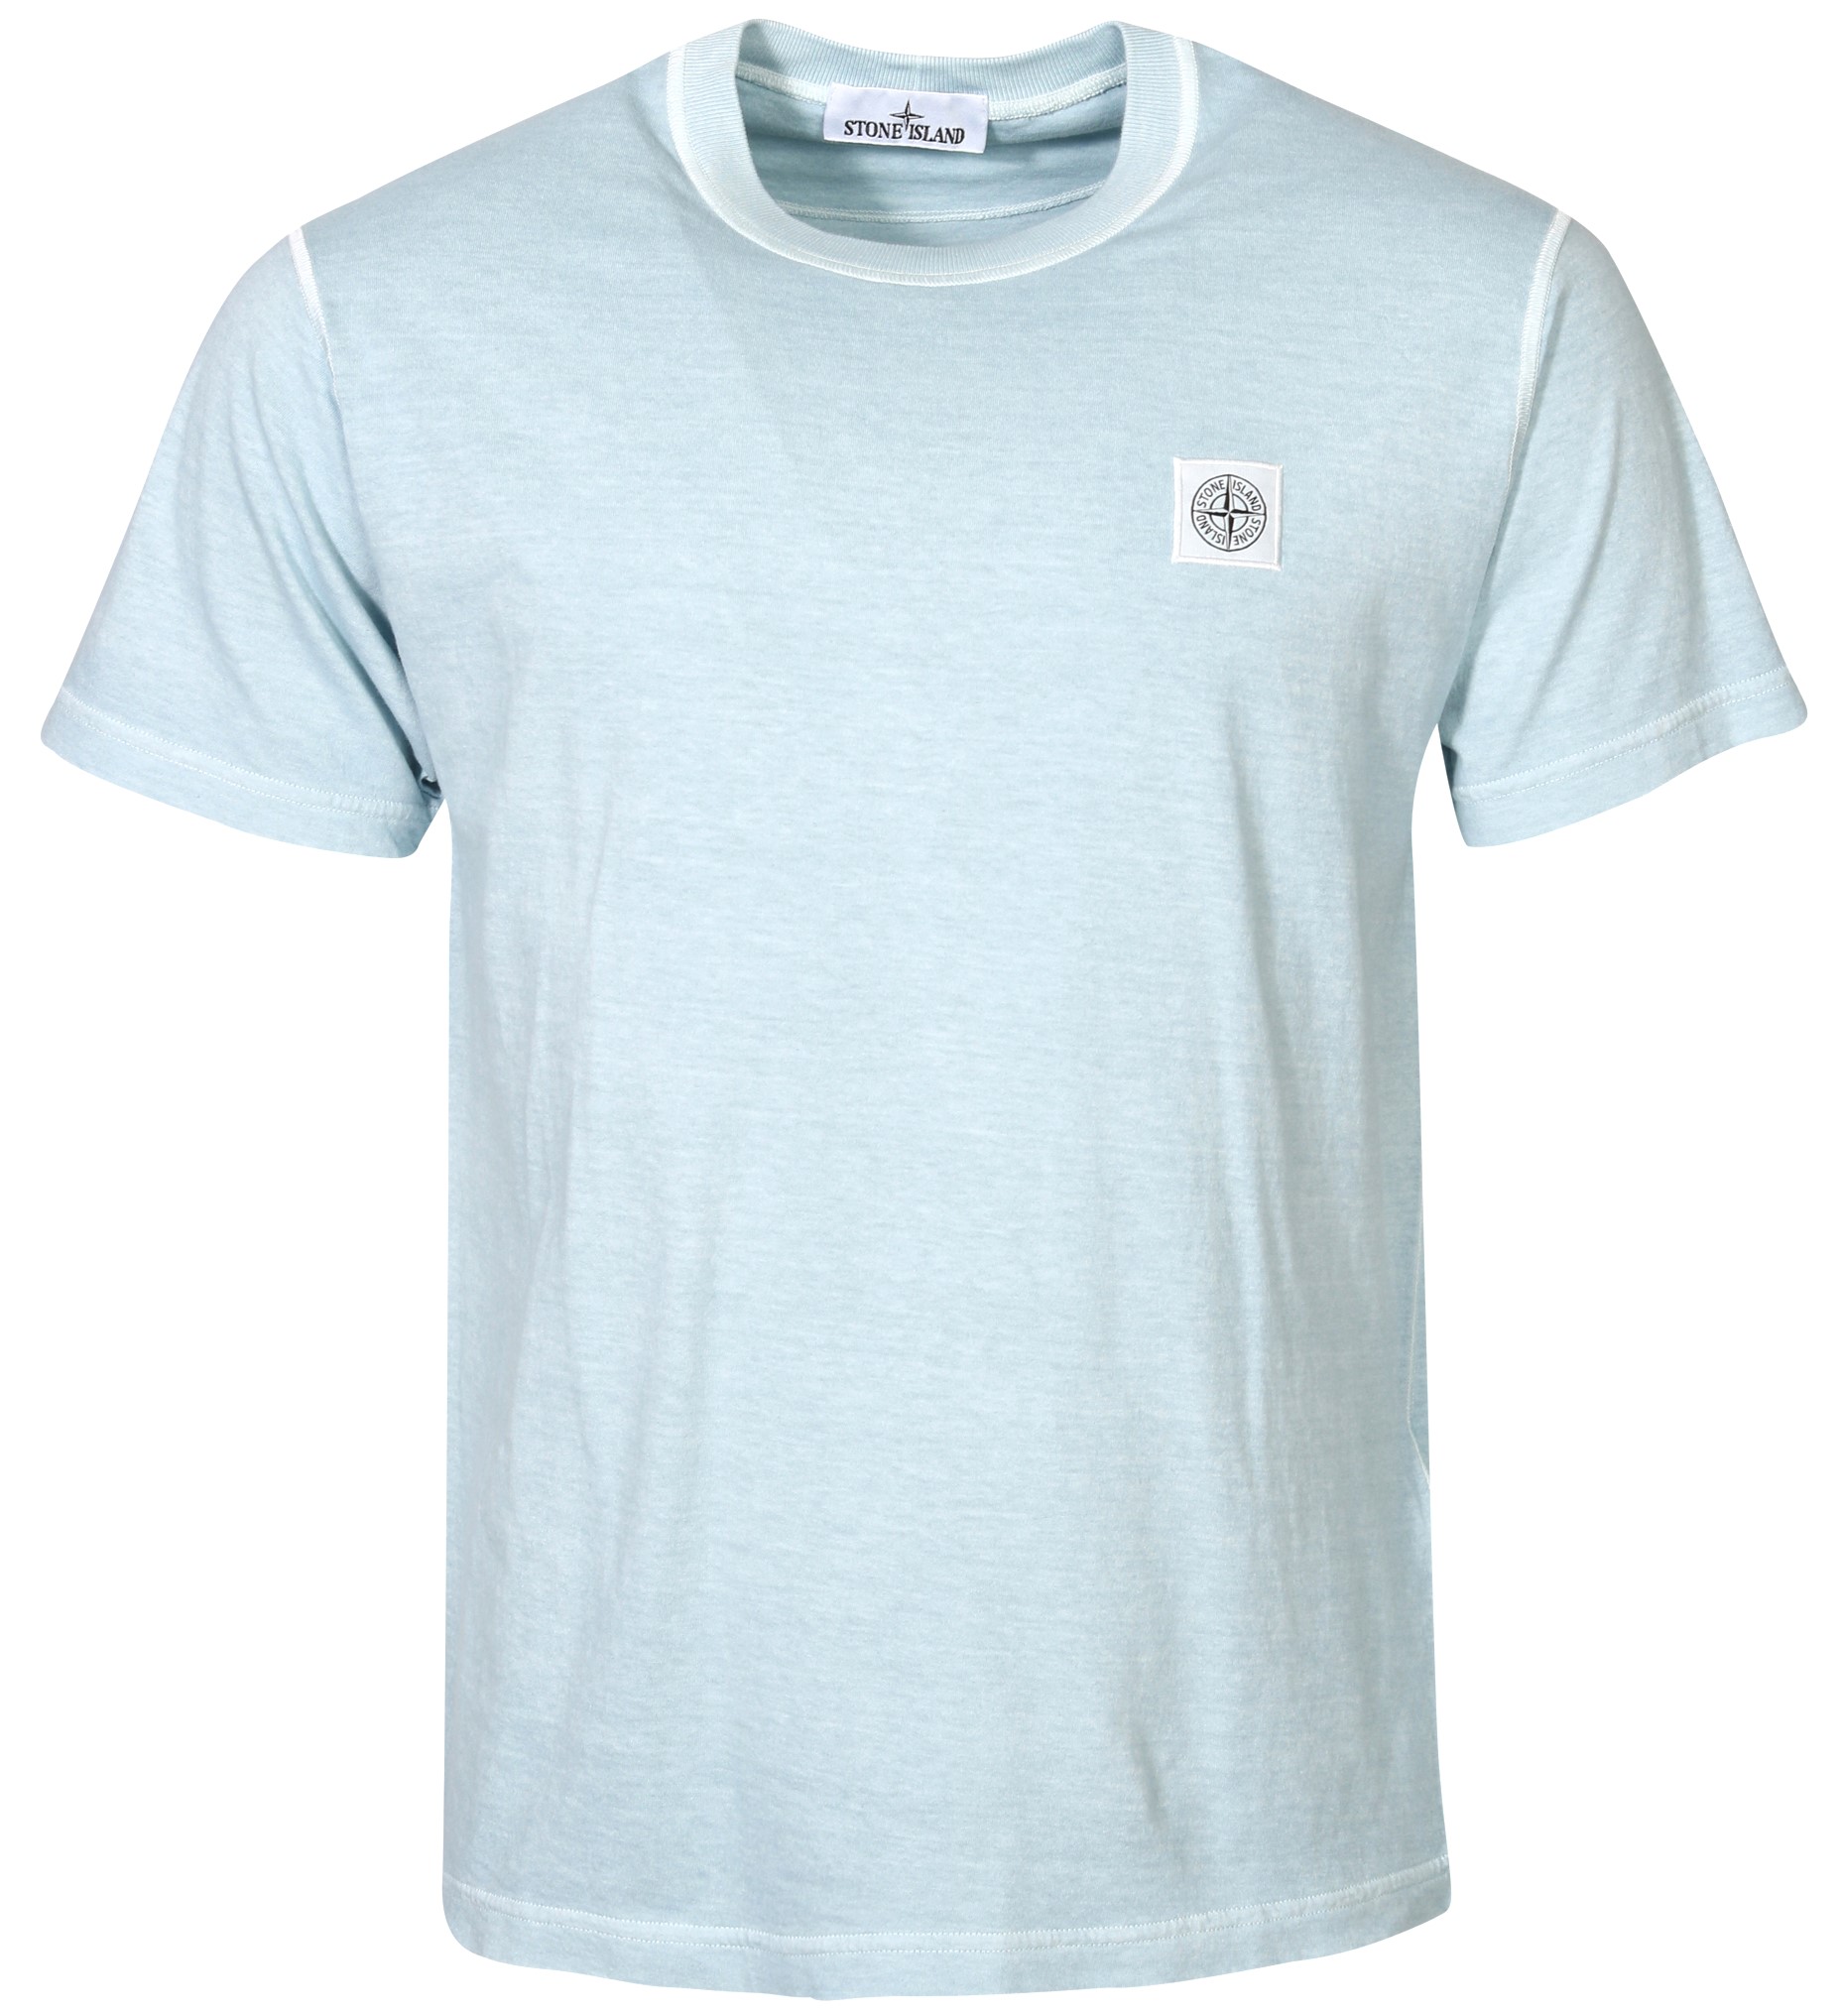 STONE ISLAND T-Shirt in Washed Sky Blue